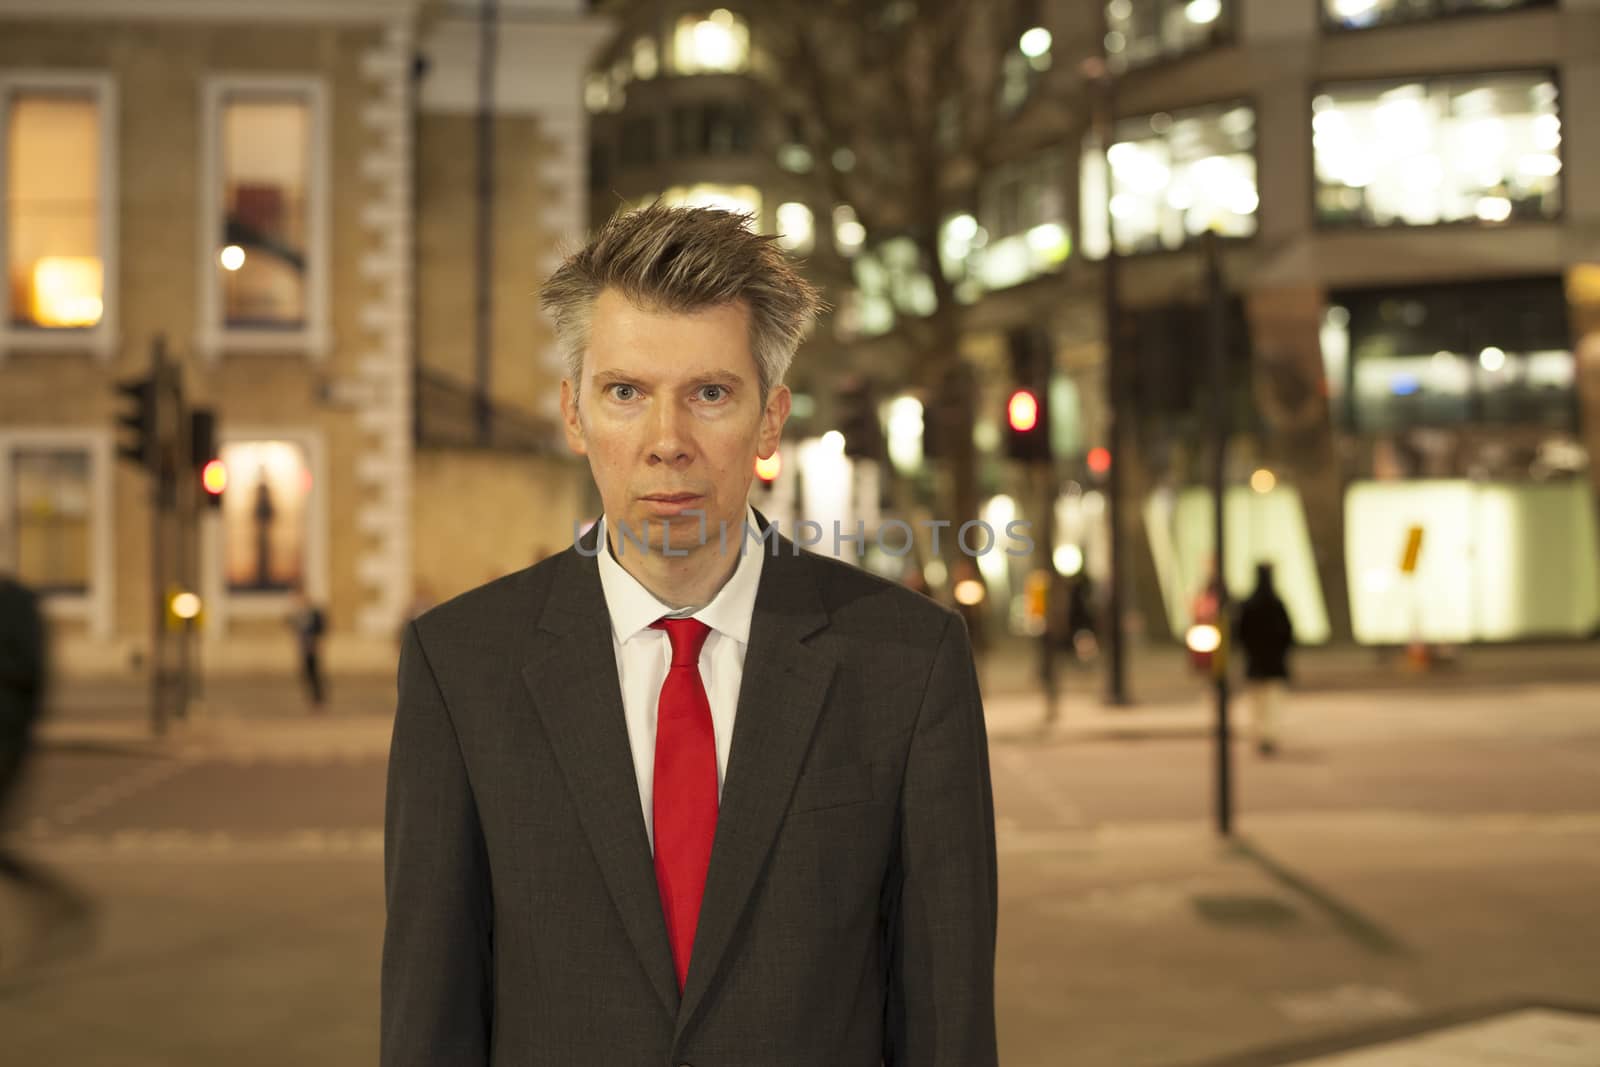 Businessman standing still at night themes of departure leaving rush hour